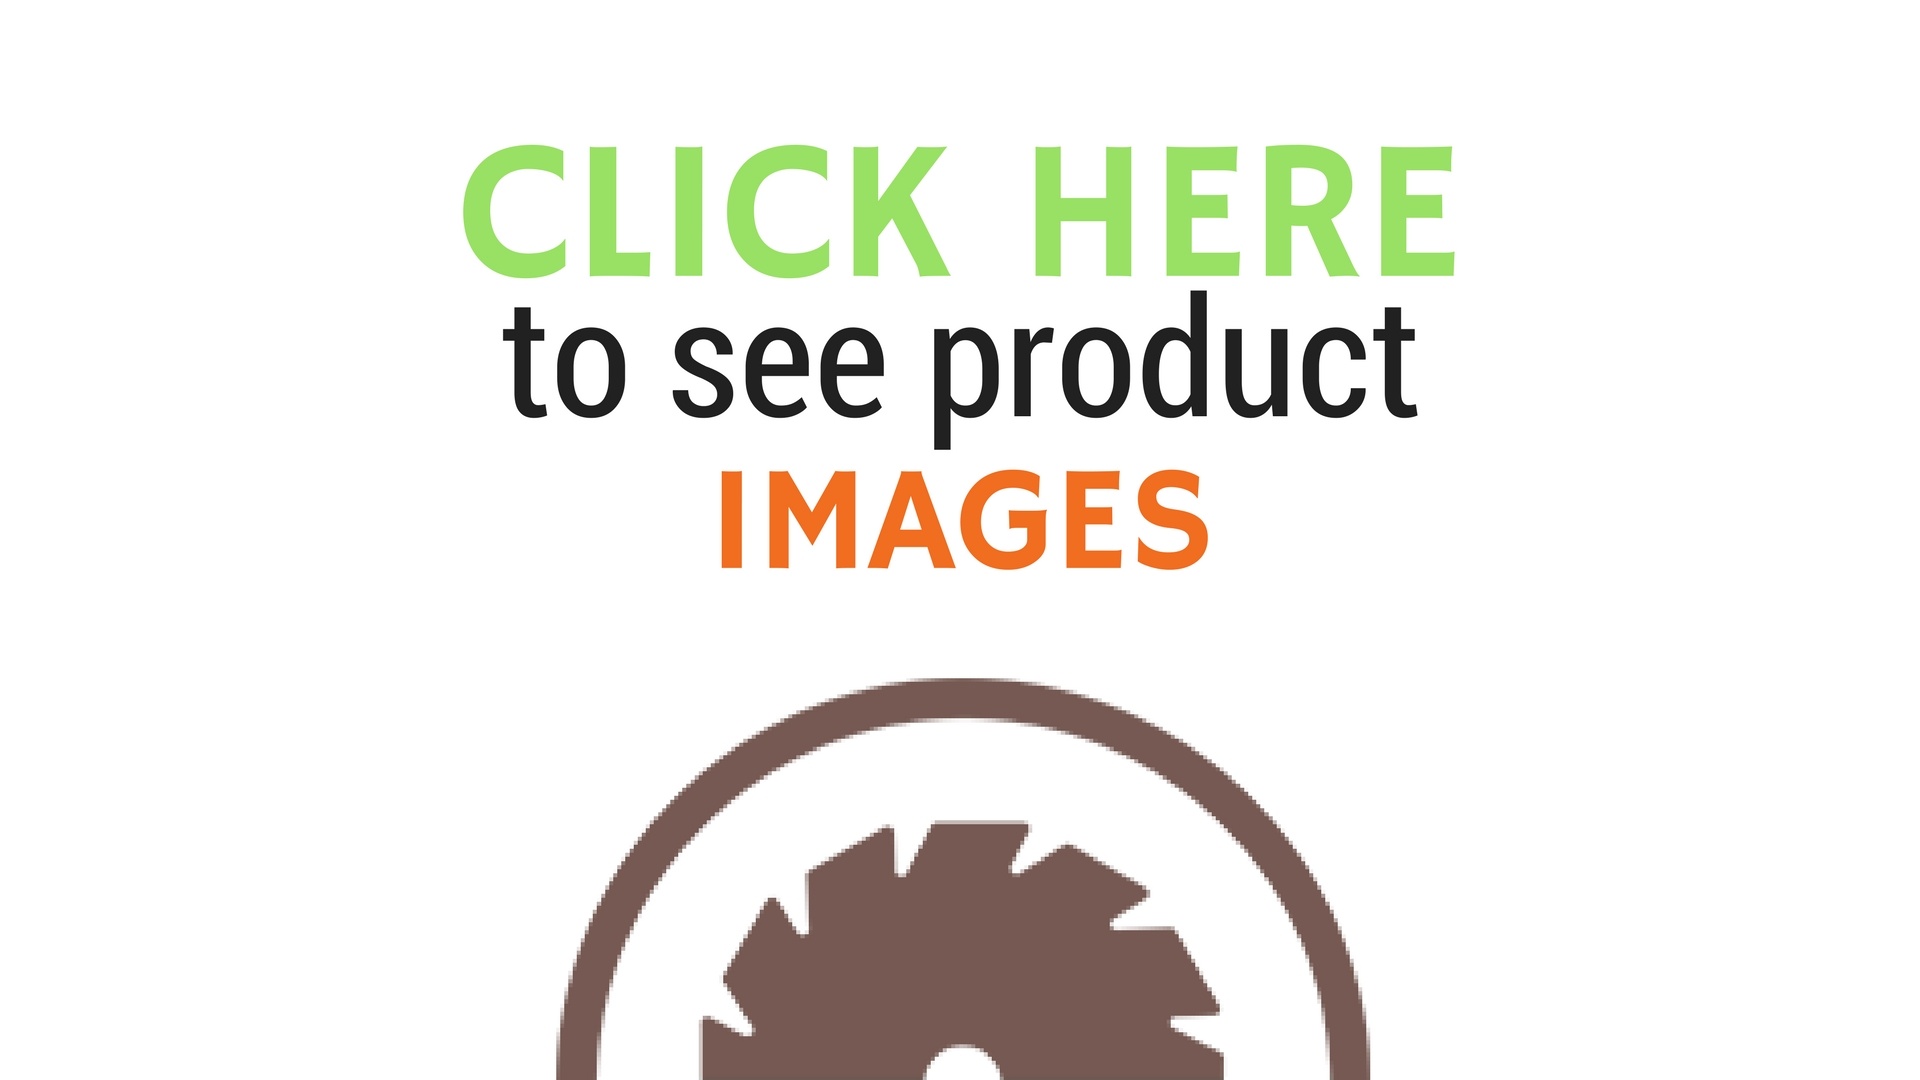 To see product images